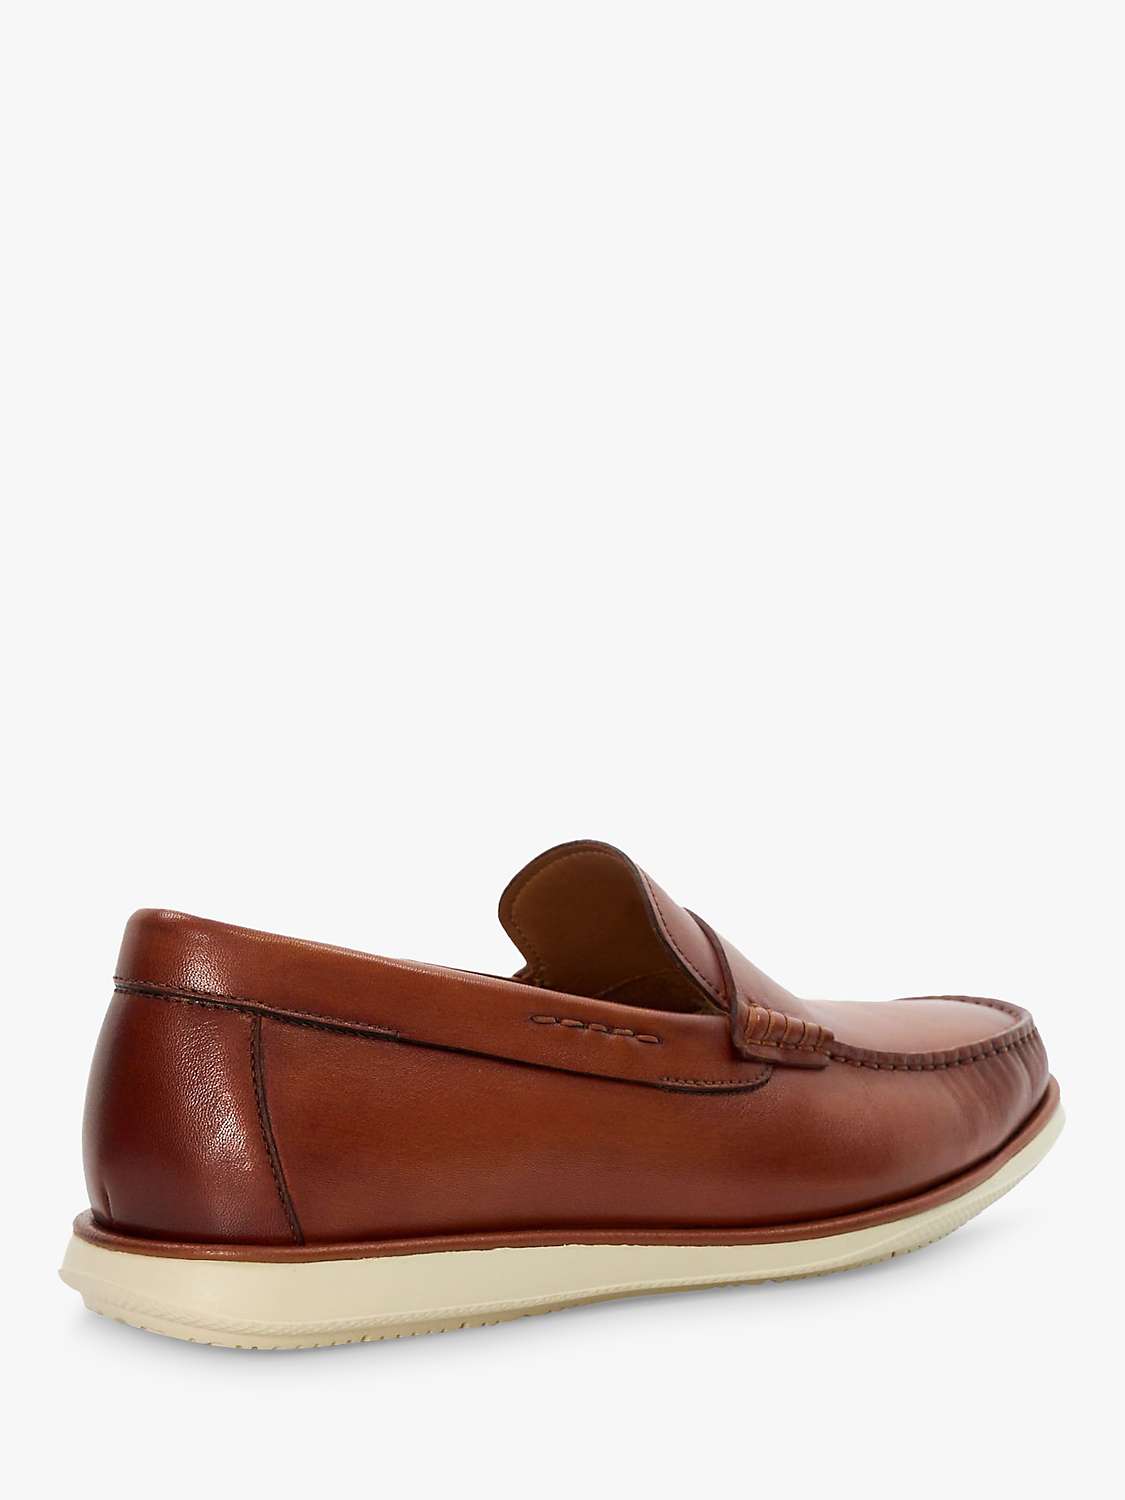 Buy Dune Berkly Leather Loafers, Brown Online at johnlewis.com